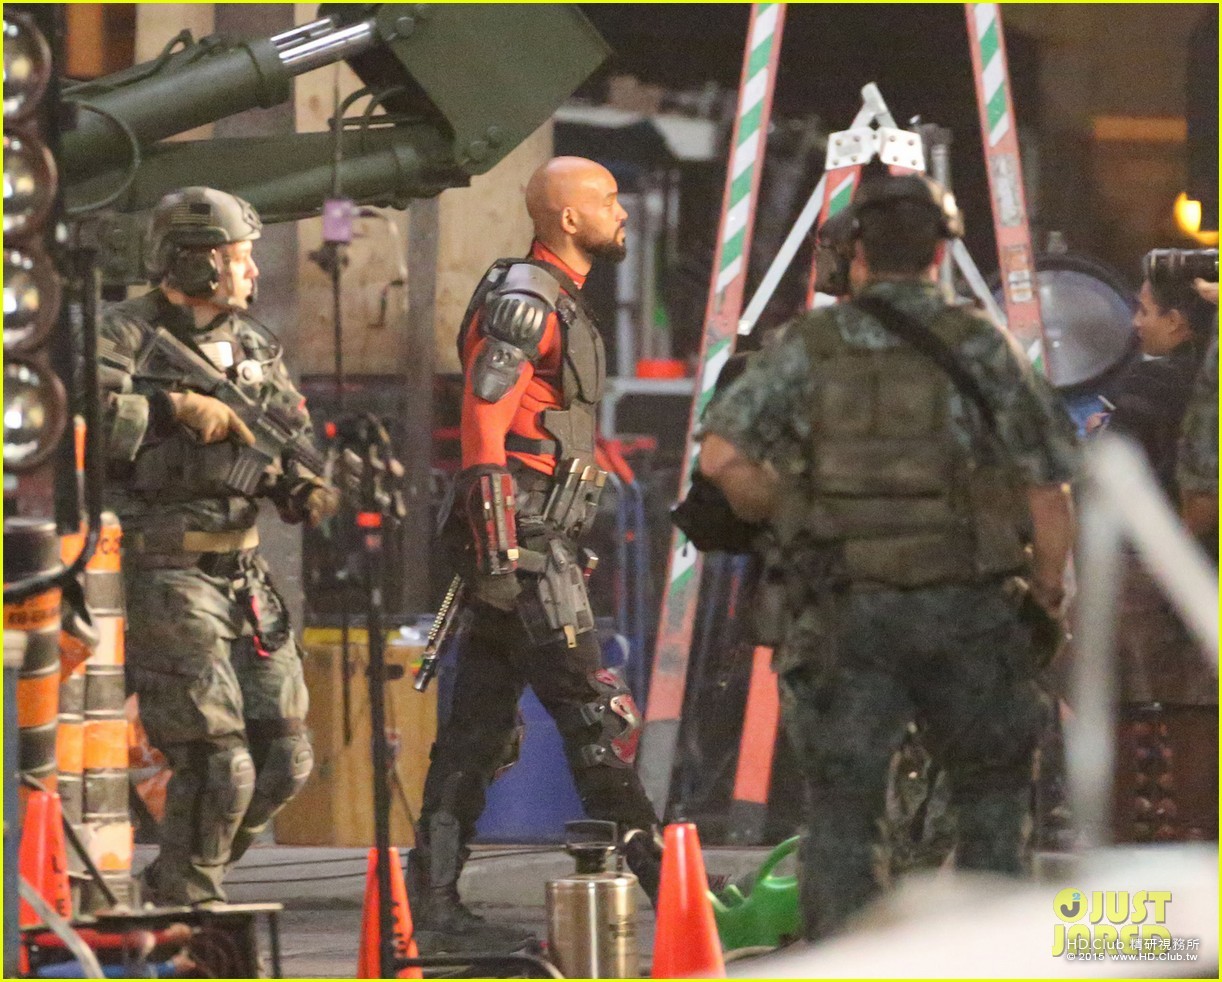 suicide-squad-cast-seen-in-costume-on-set-04.jpg